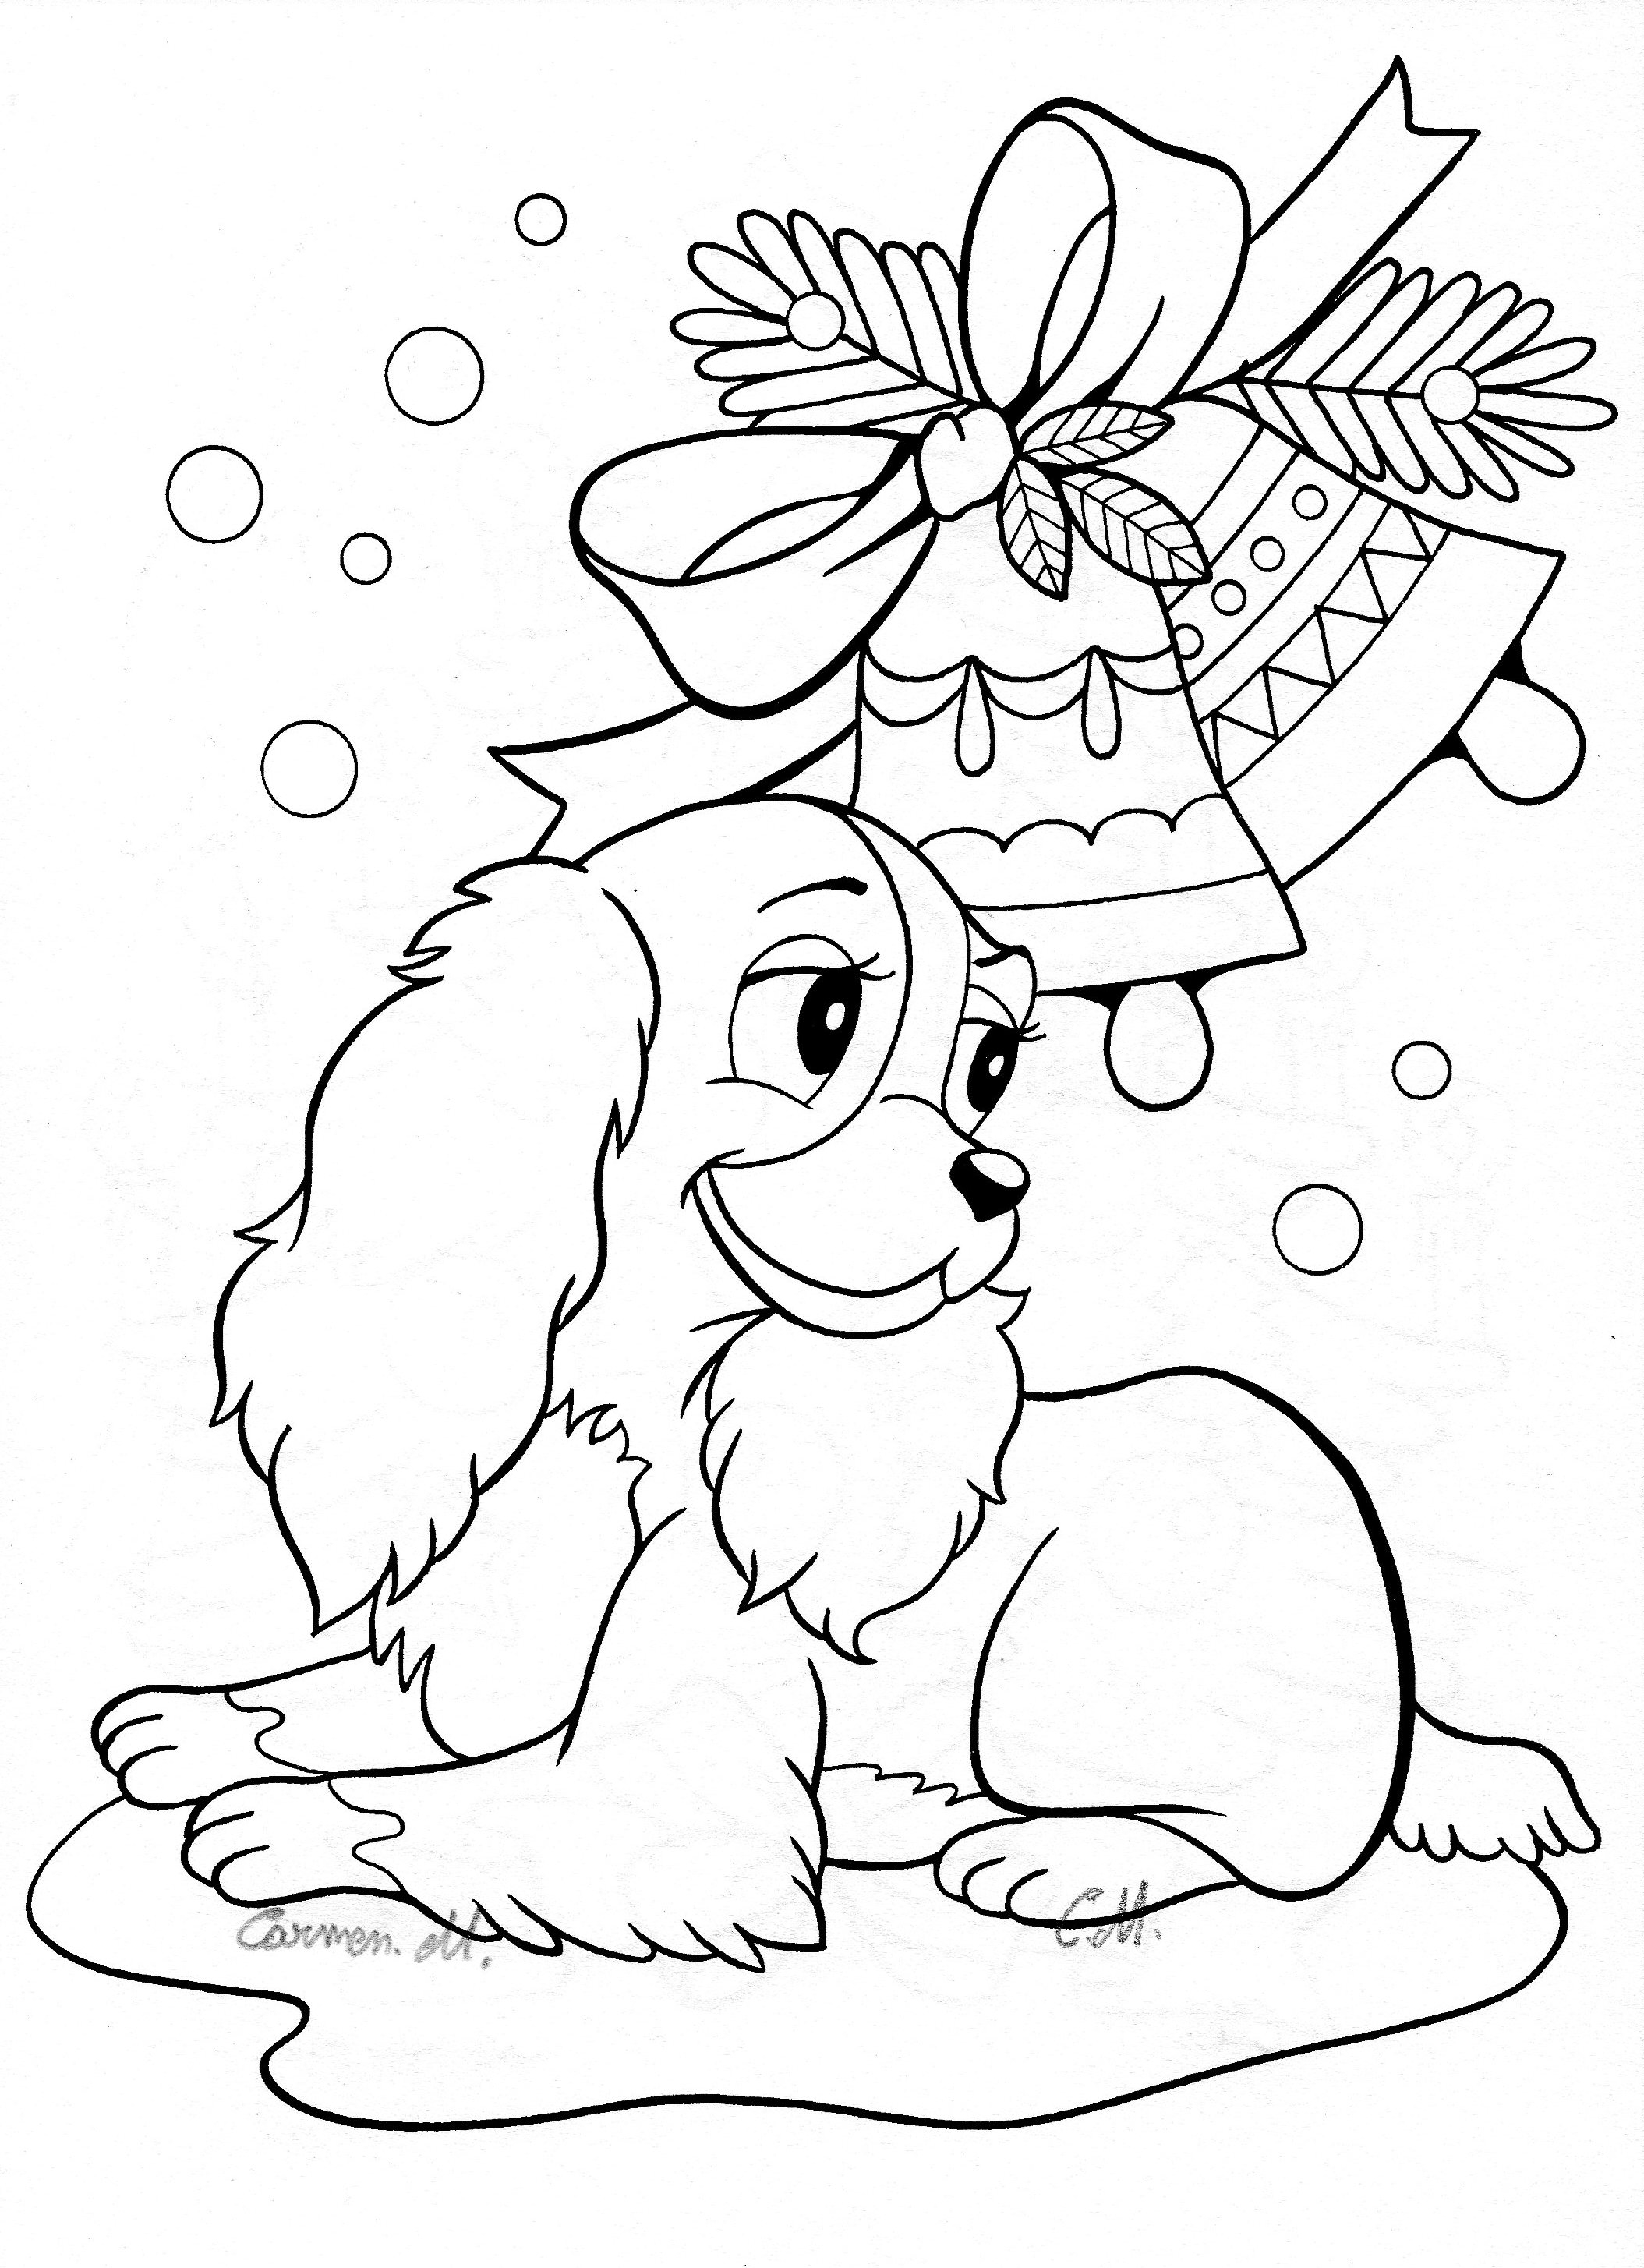 Cute Snowman Coloring Pages at GetColorings.com | Free printable